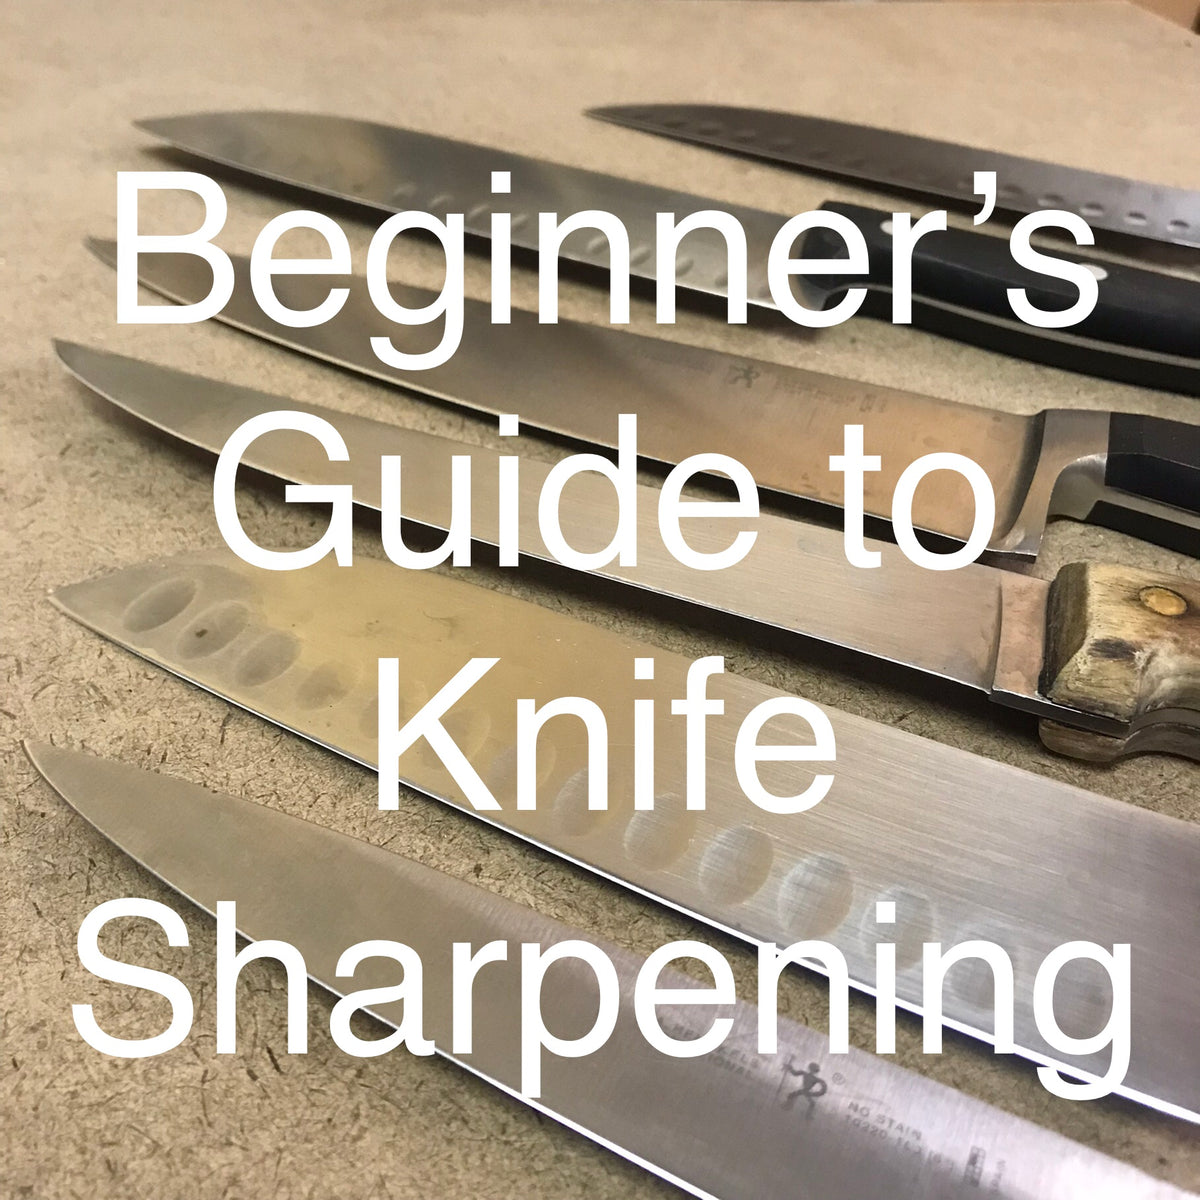 The Best Angle For Knife Sharpening